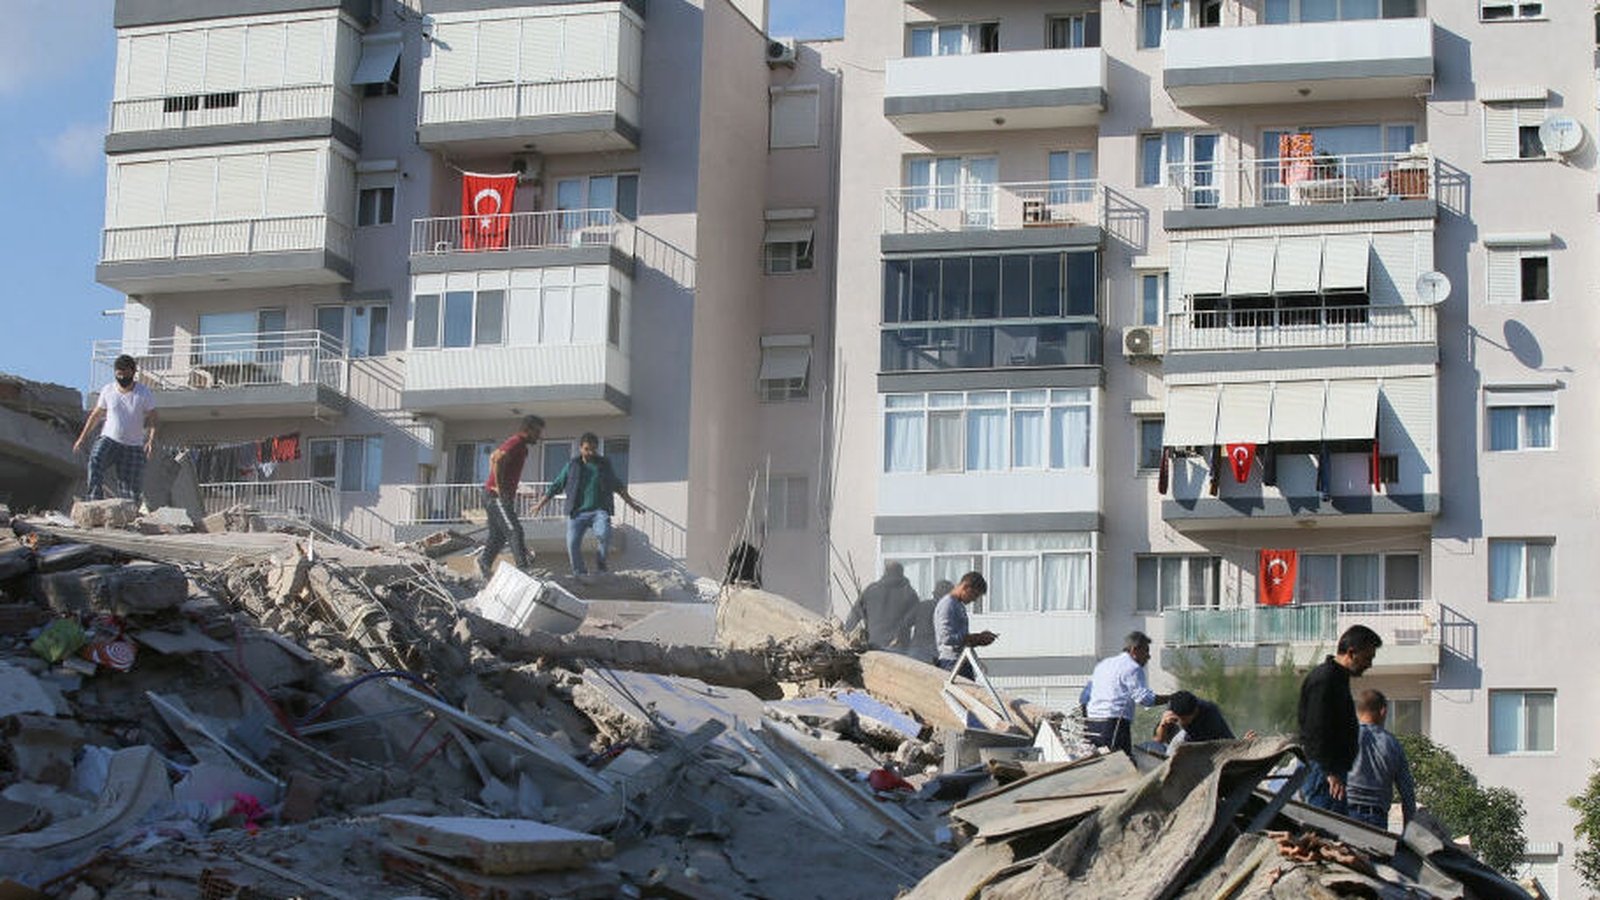 The quake killed at least six people and injured 120 in Turkey and Greece

